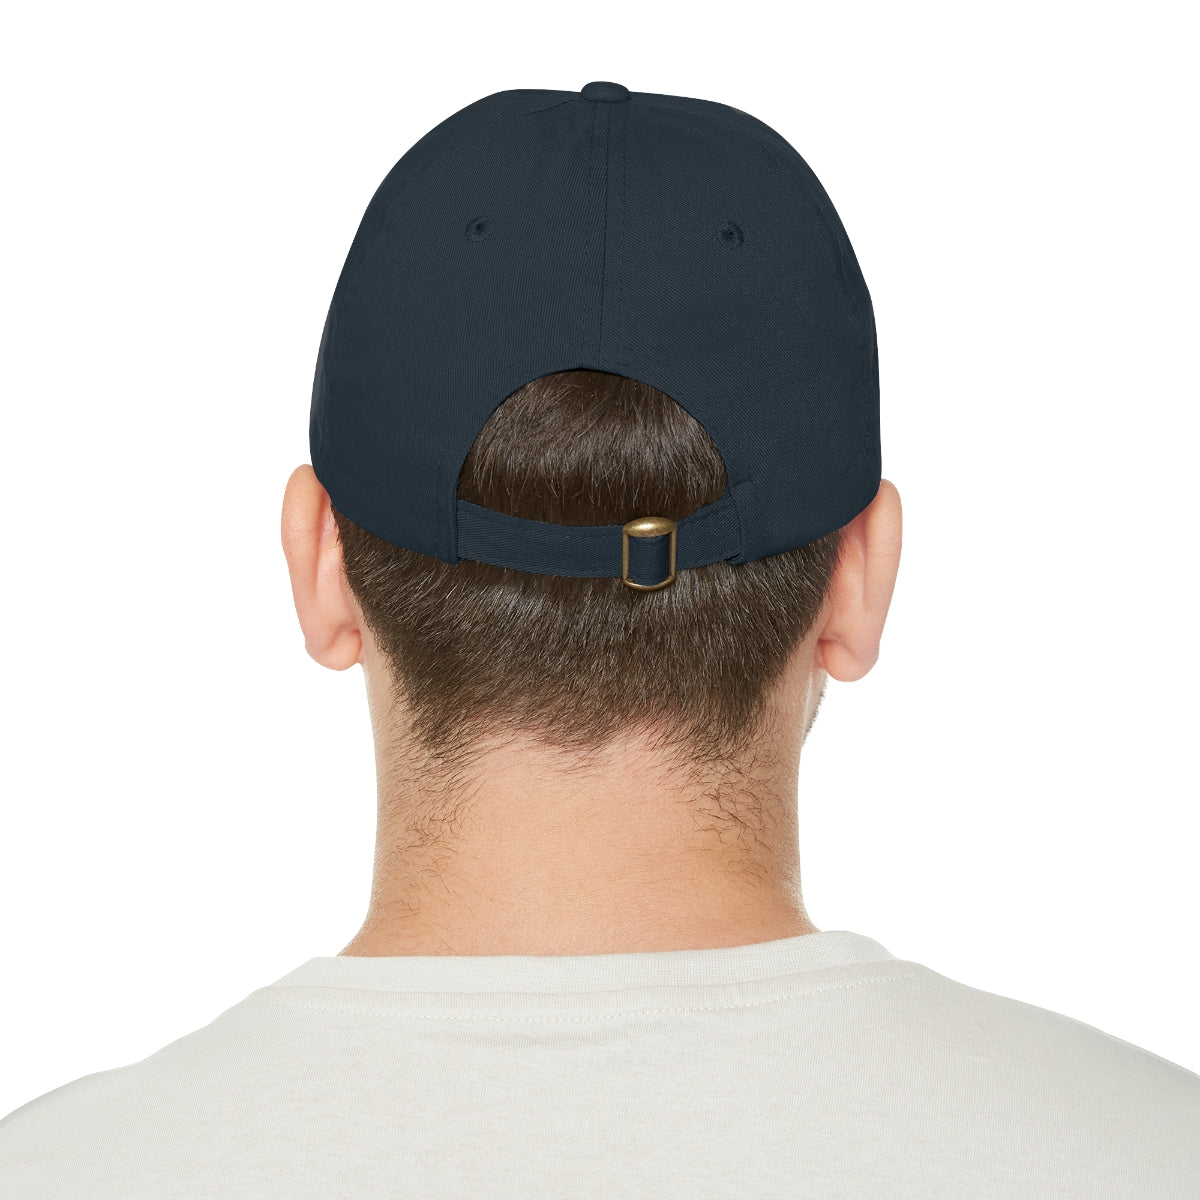 Big Foot Retro Stripe Dad Hat with Leather Patch